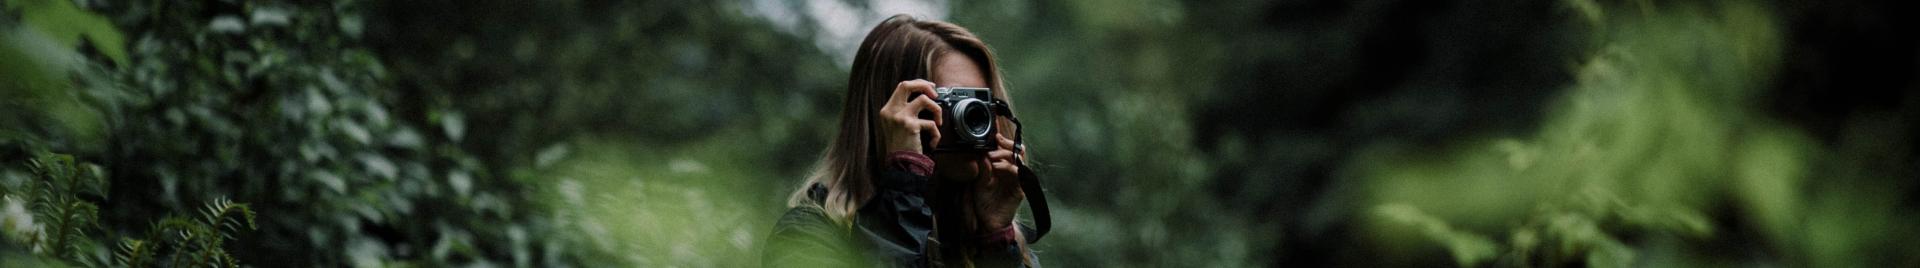 Image of woman taking photos in forest